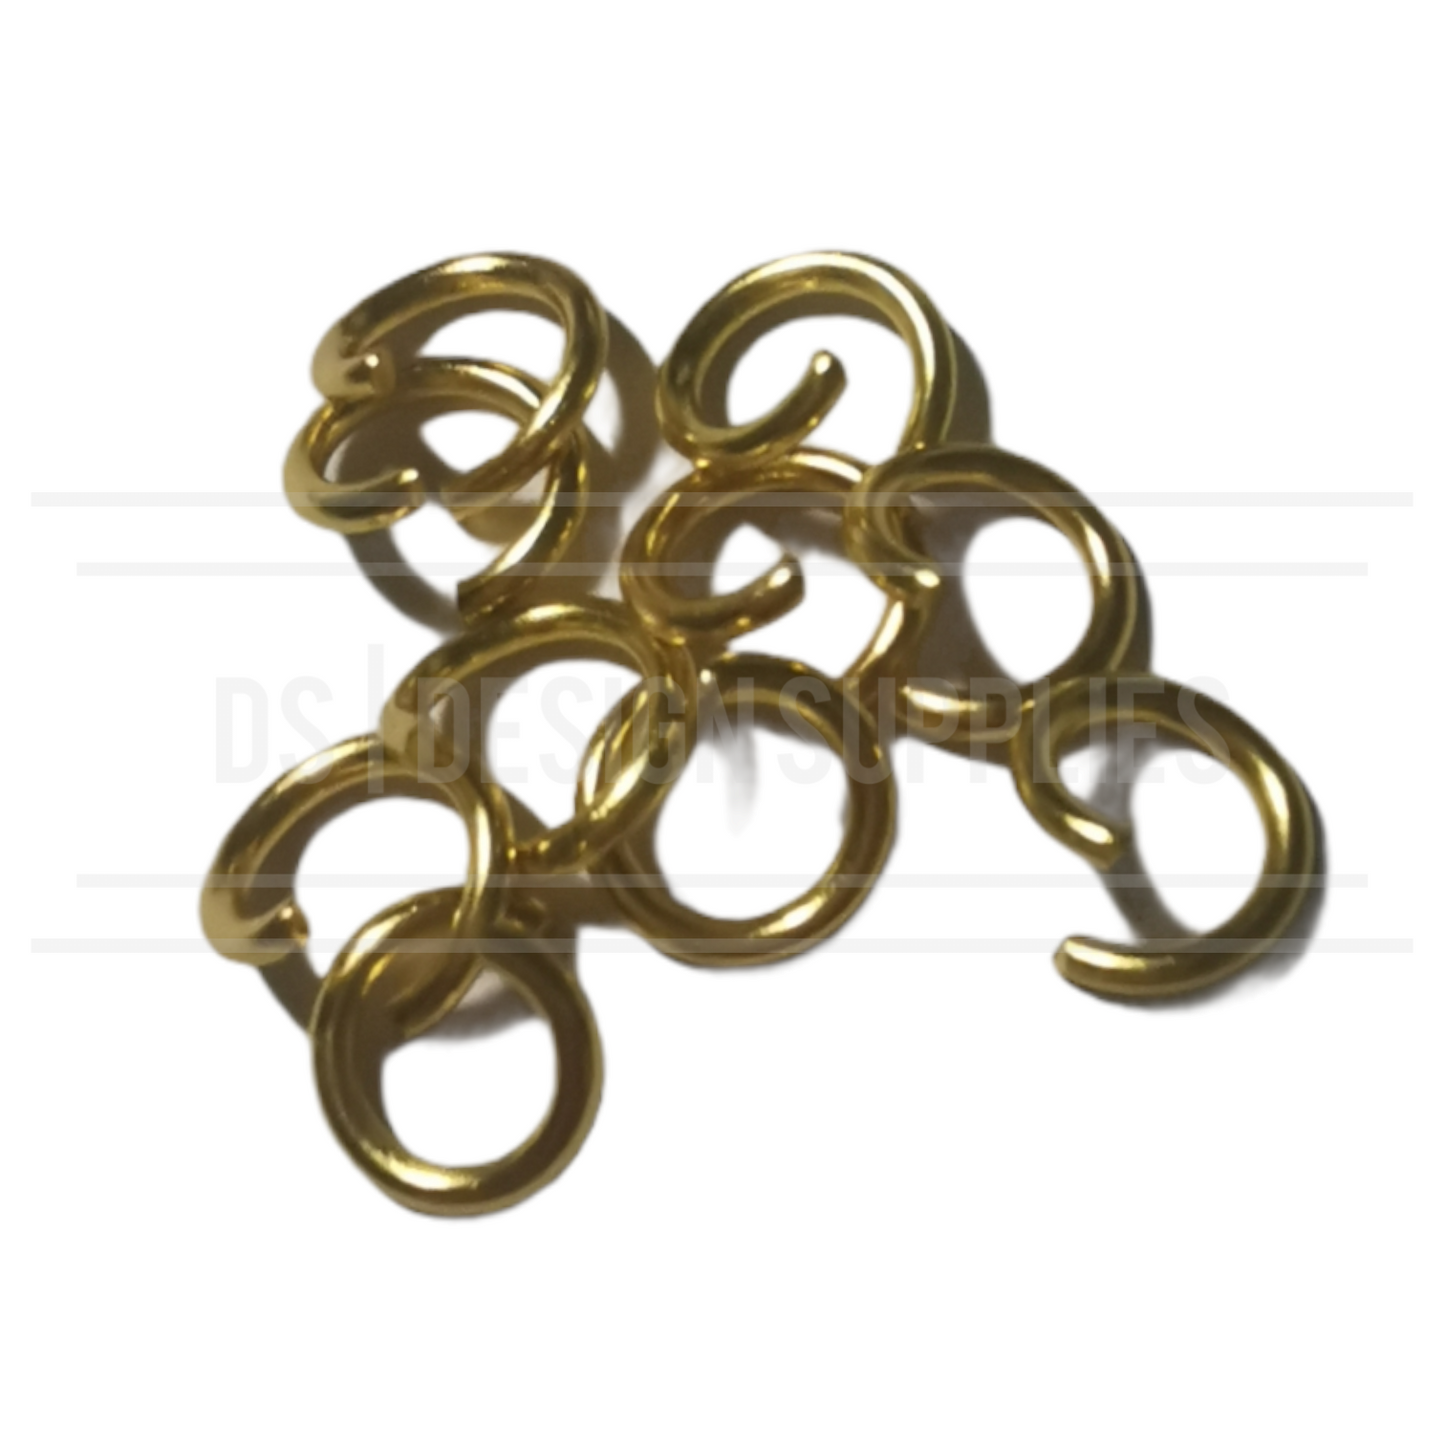 10 Jump Rings - Gold Open 8mm